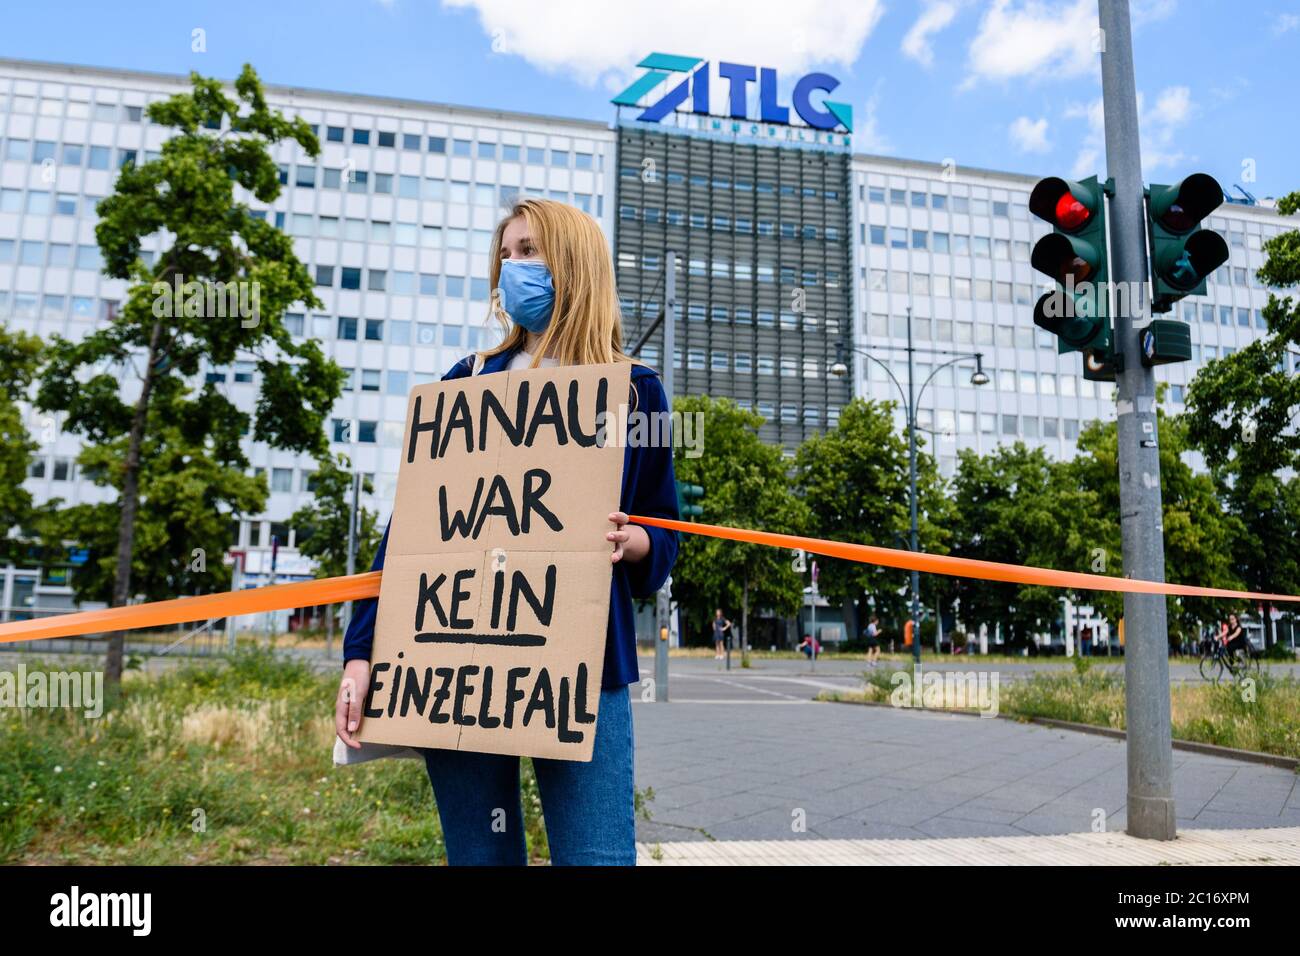 June 14, 2020, Berlin, Berlin, Germany: A woman holding a sign reading ' Hanau war kein Einzelfall' [engl. Hanau was not an isolated incident] can  be seen while several thousand people, various alliances,